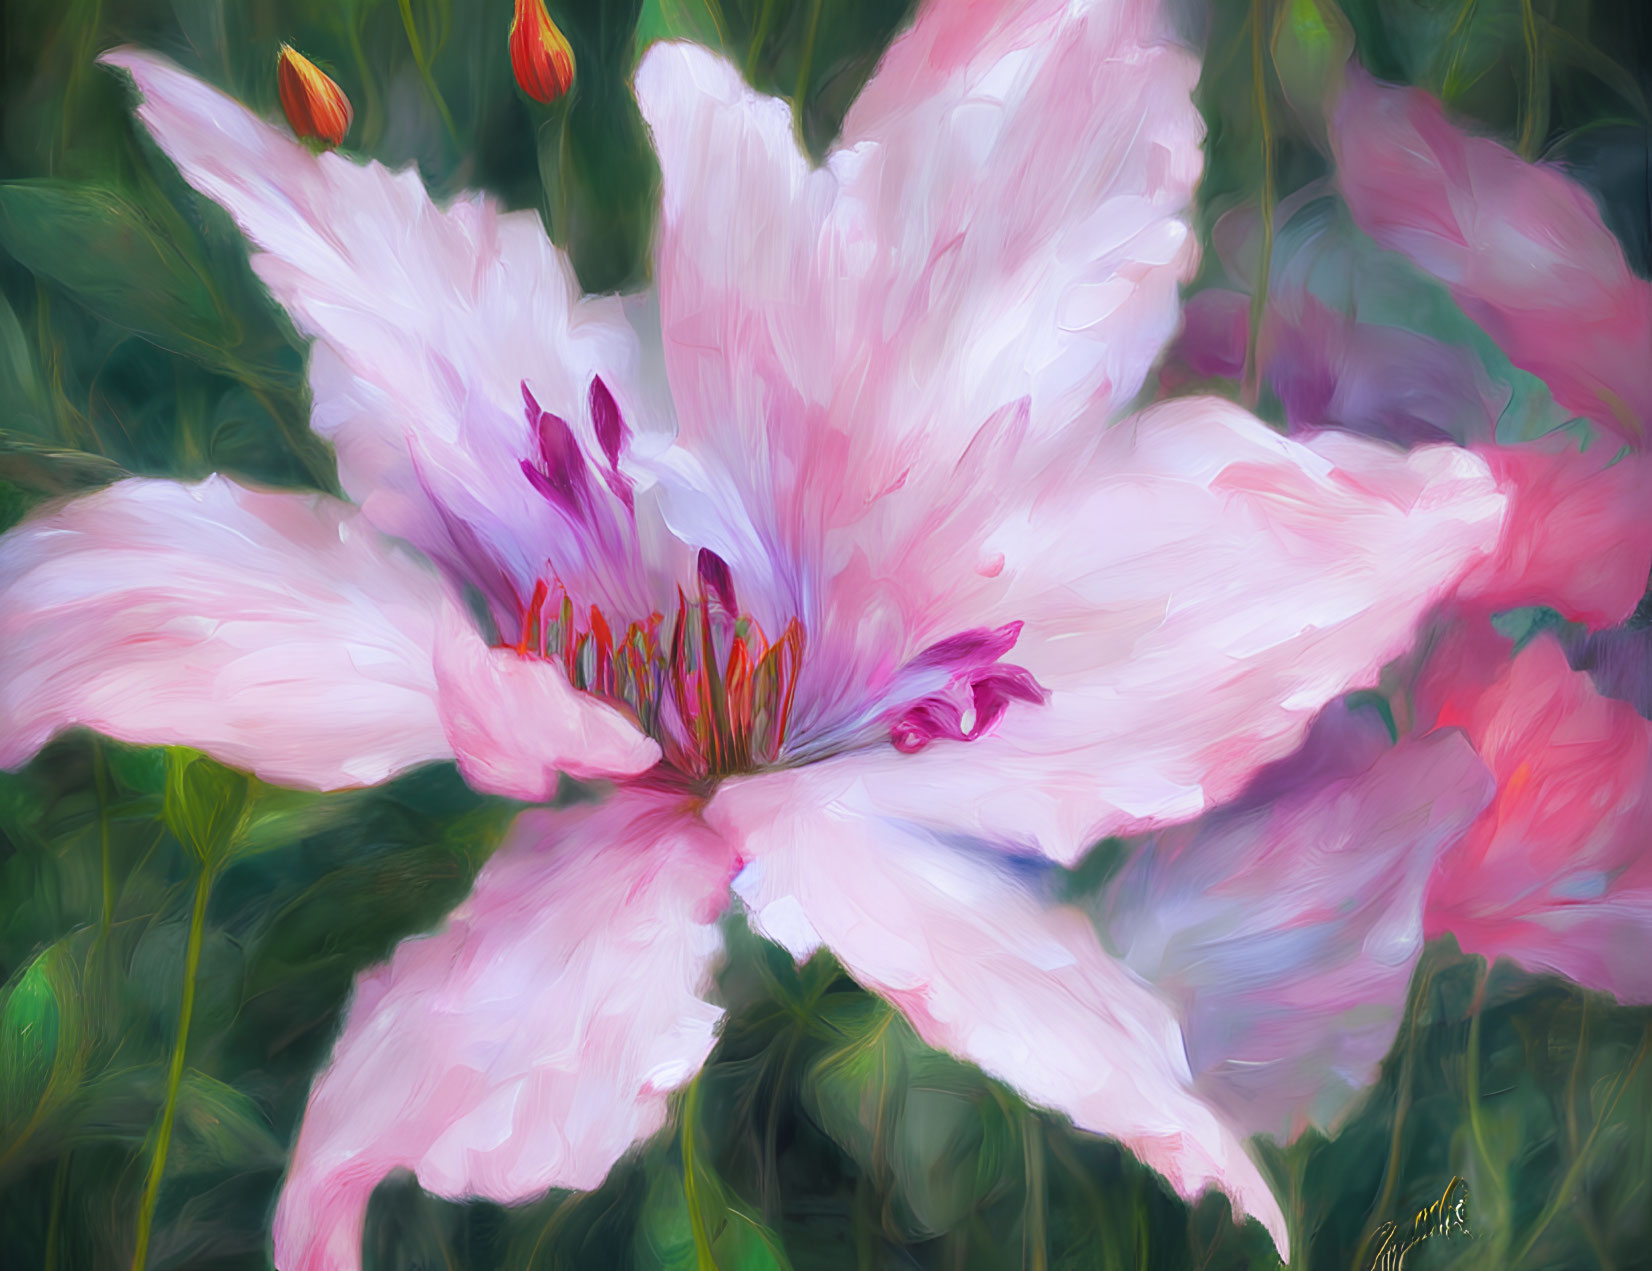 Impressionistic painting of pale pink flower with darker pink stamens